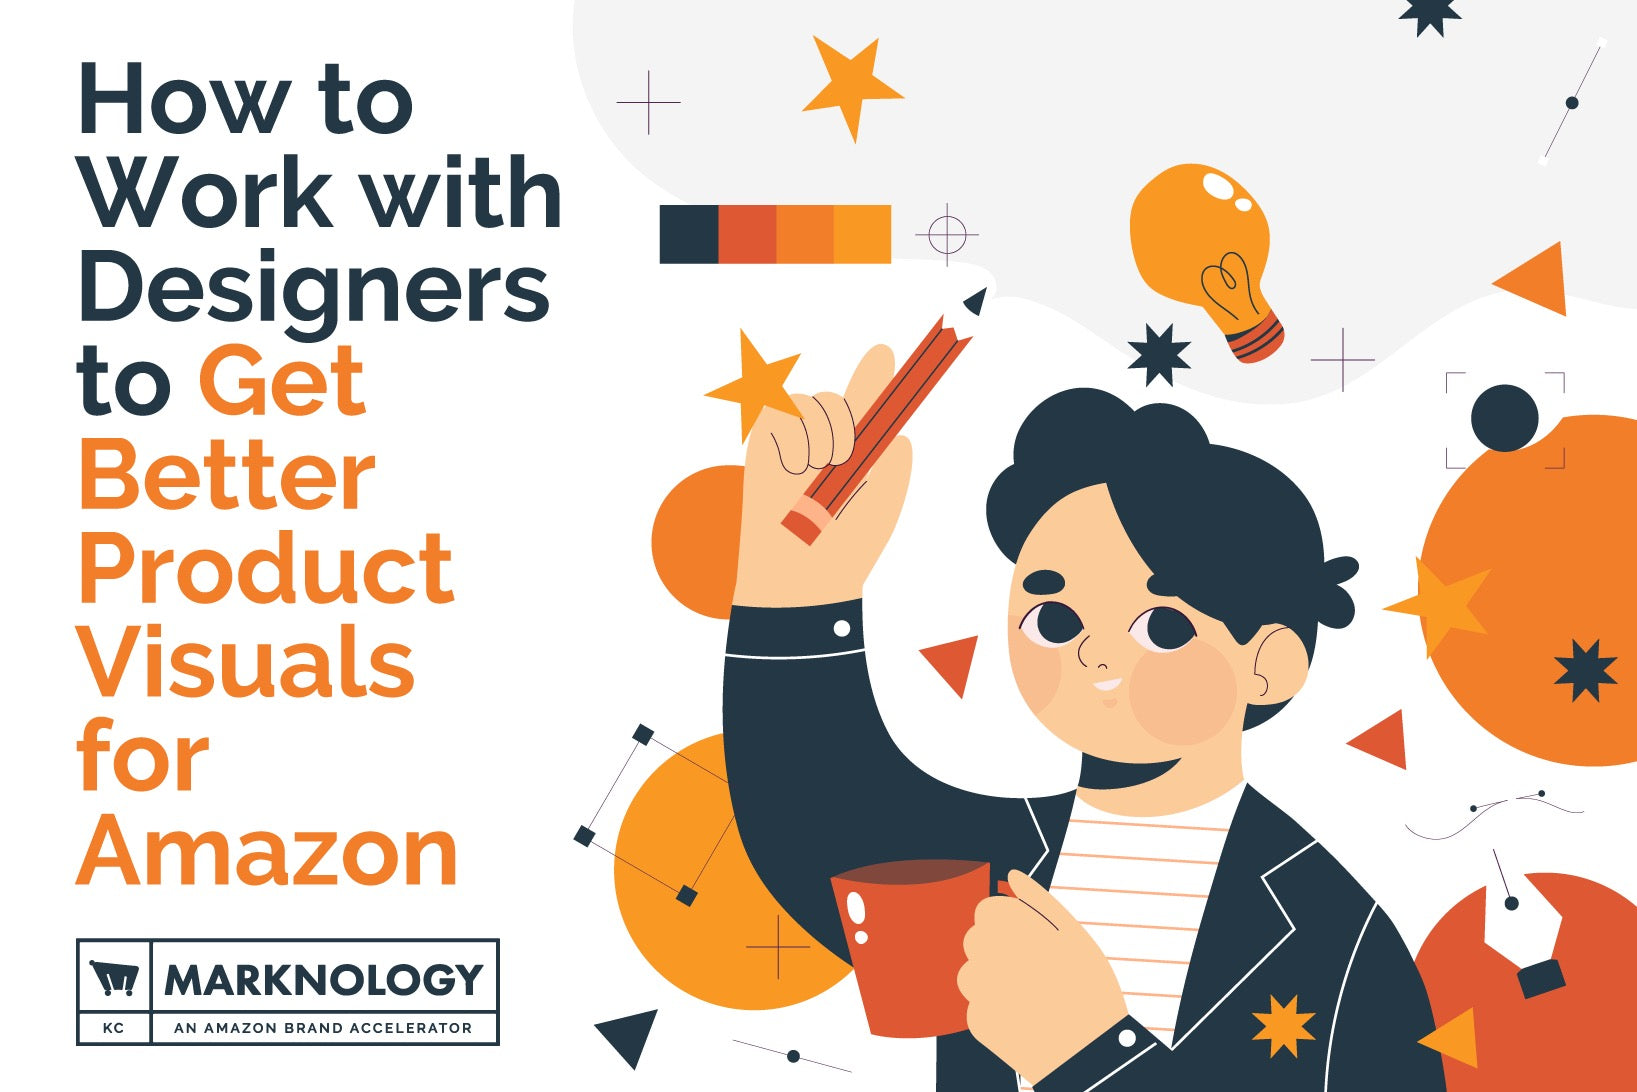 How to Work with Designers to Get Better Product Visuals for Amazon